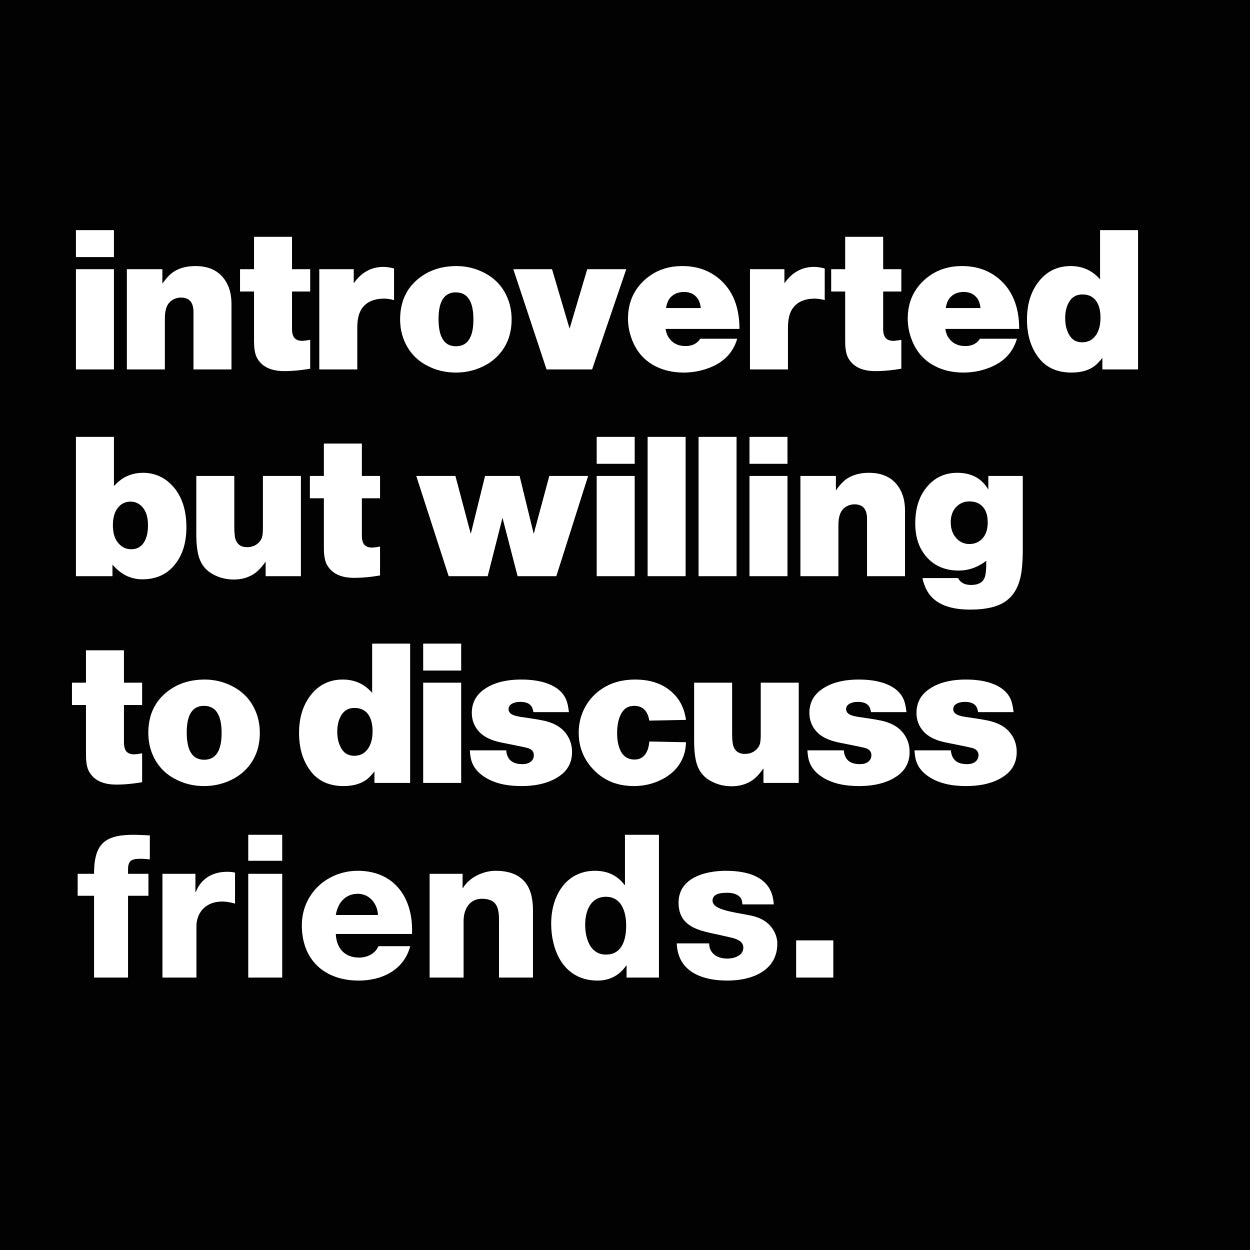 Introverted But Willing To Discuss Friends